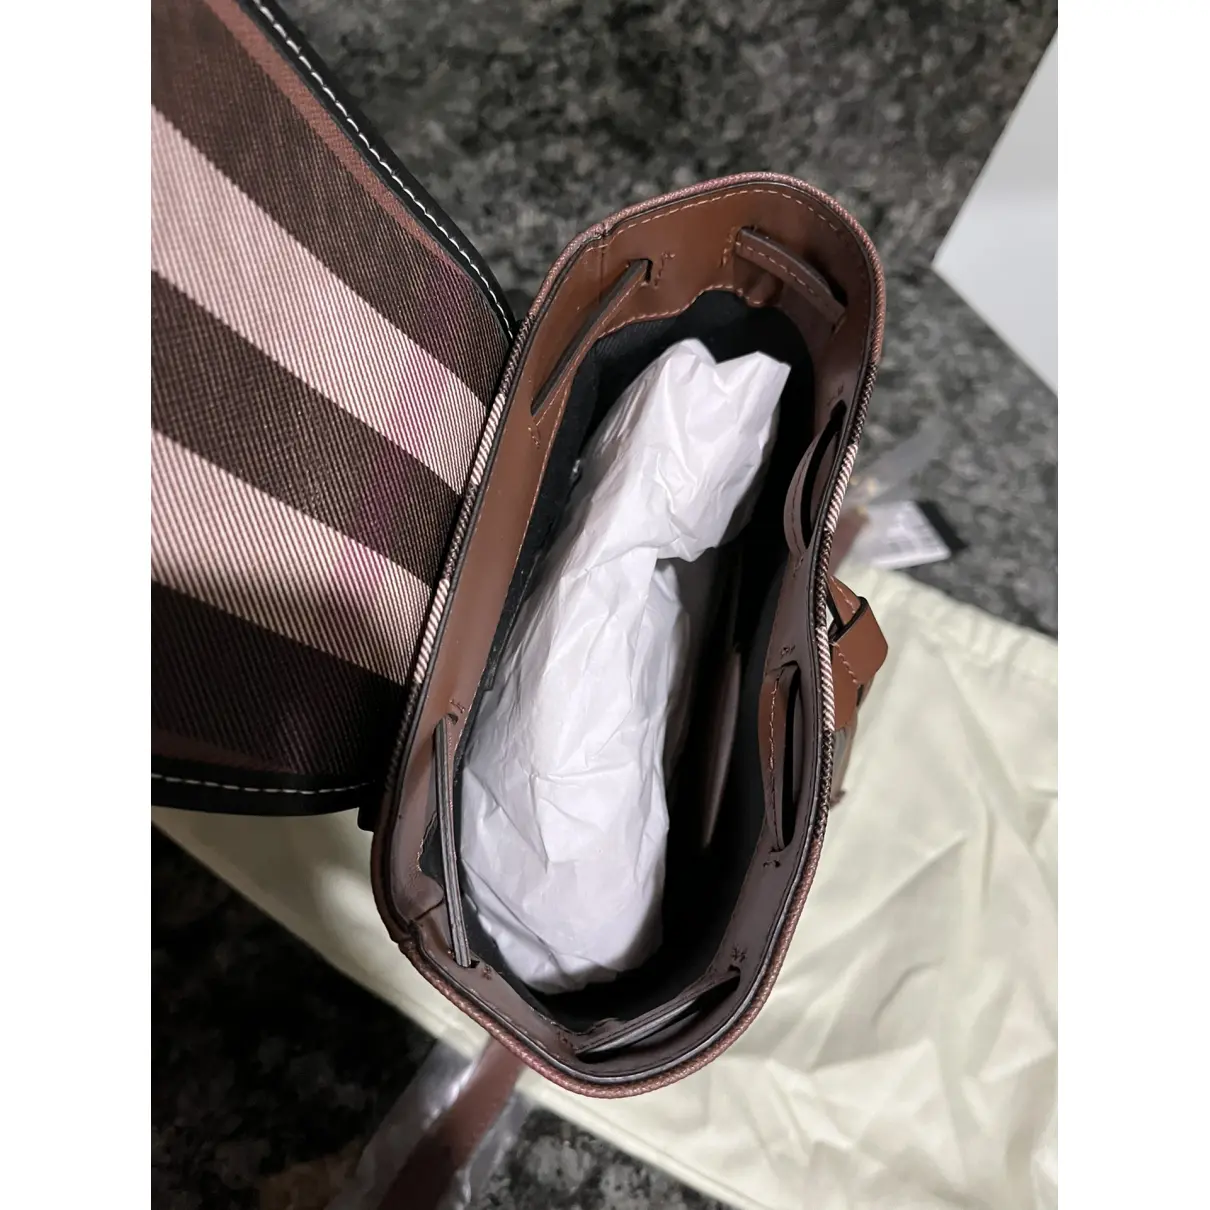 Leather backpack Burberry